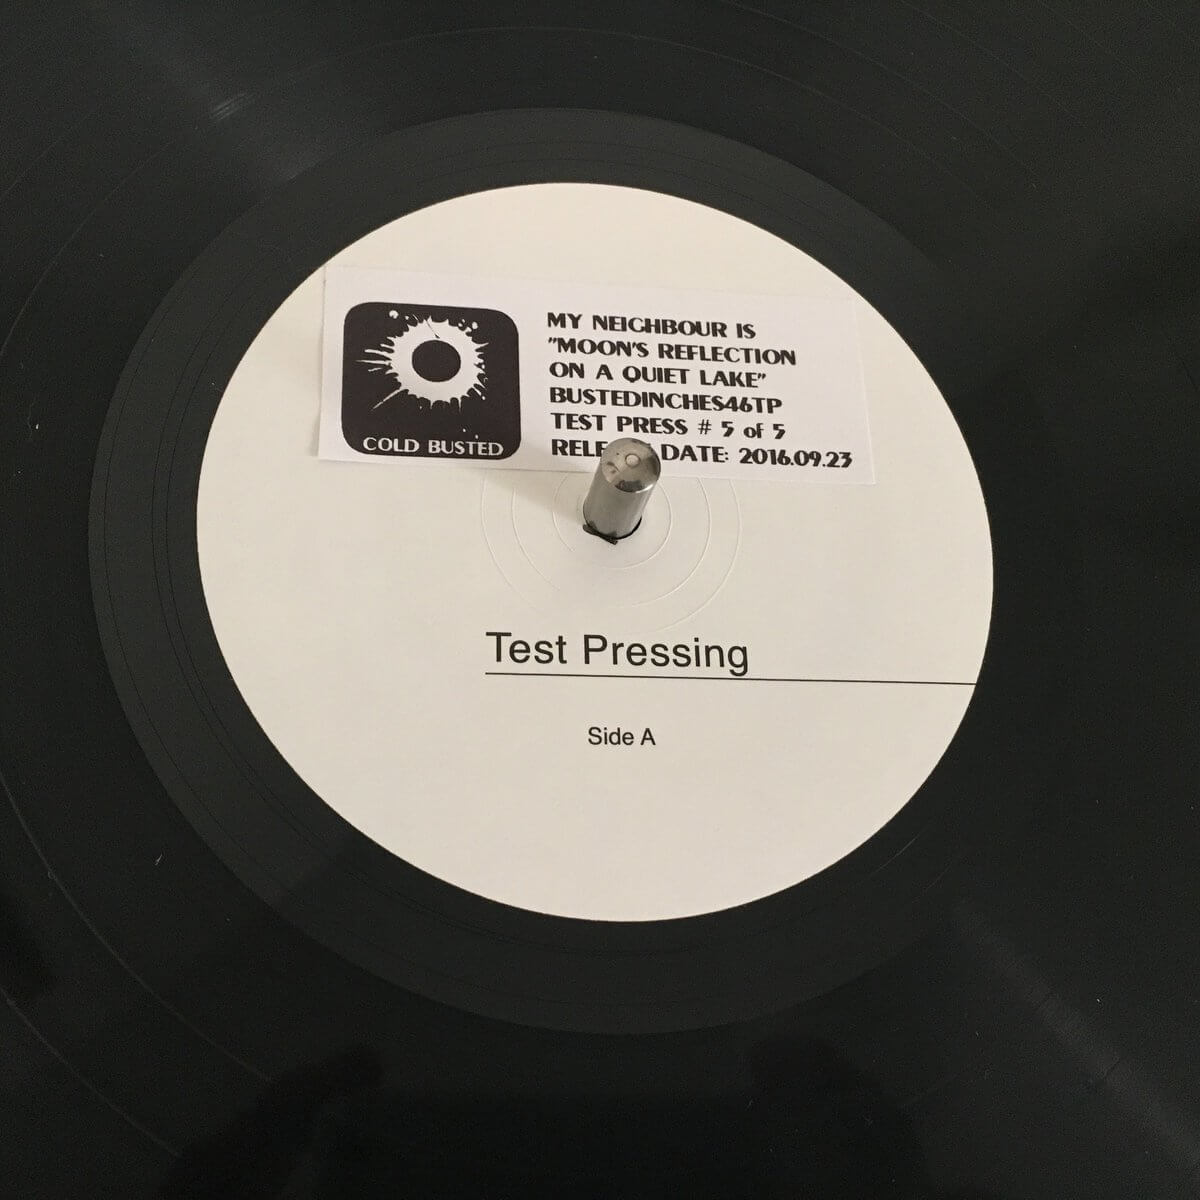 My Neighbour Is - Moon's Reflection On A Quiet Lake - Limited Edition 12 Inch Vinyl Test Pressing - Cold Busted